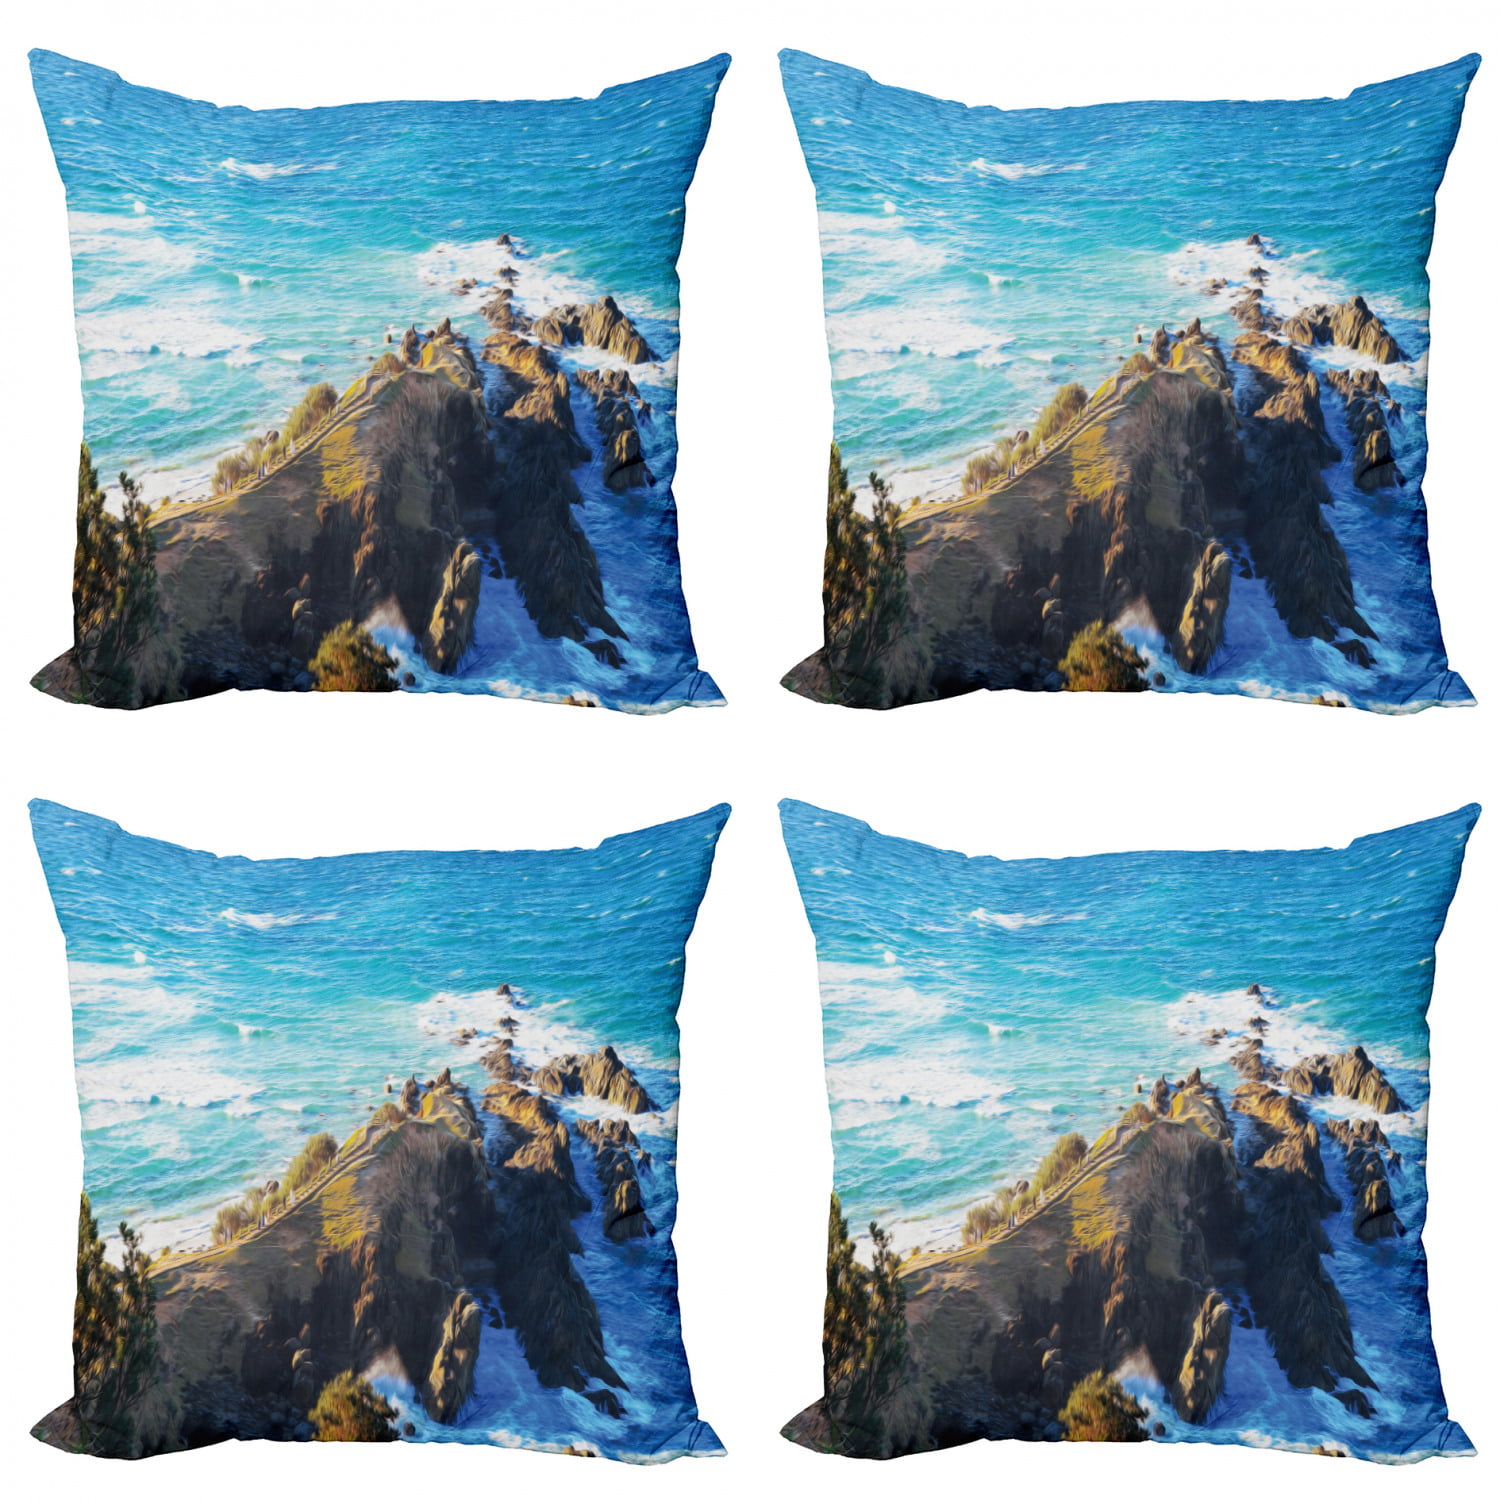 Multicolor 16x16 National Park Gifts & Accessories Retro Vintage Yosemite National Park Throw Pillow